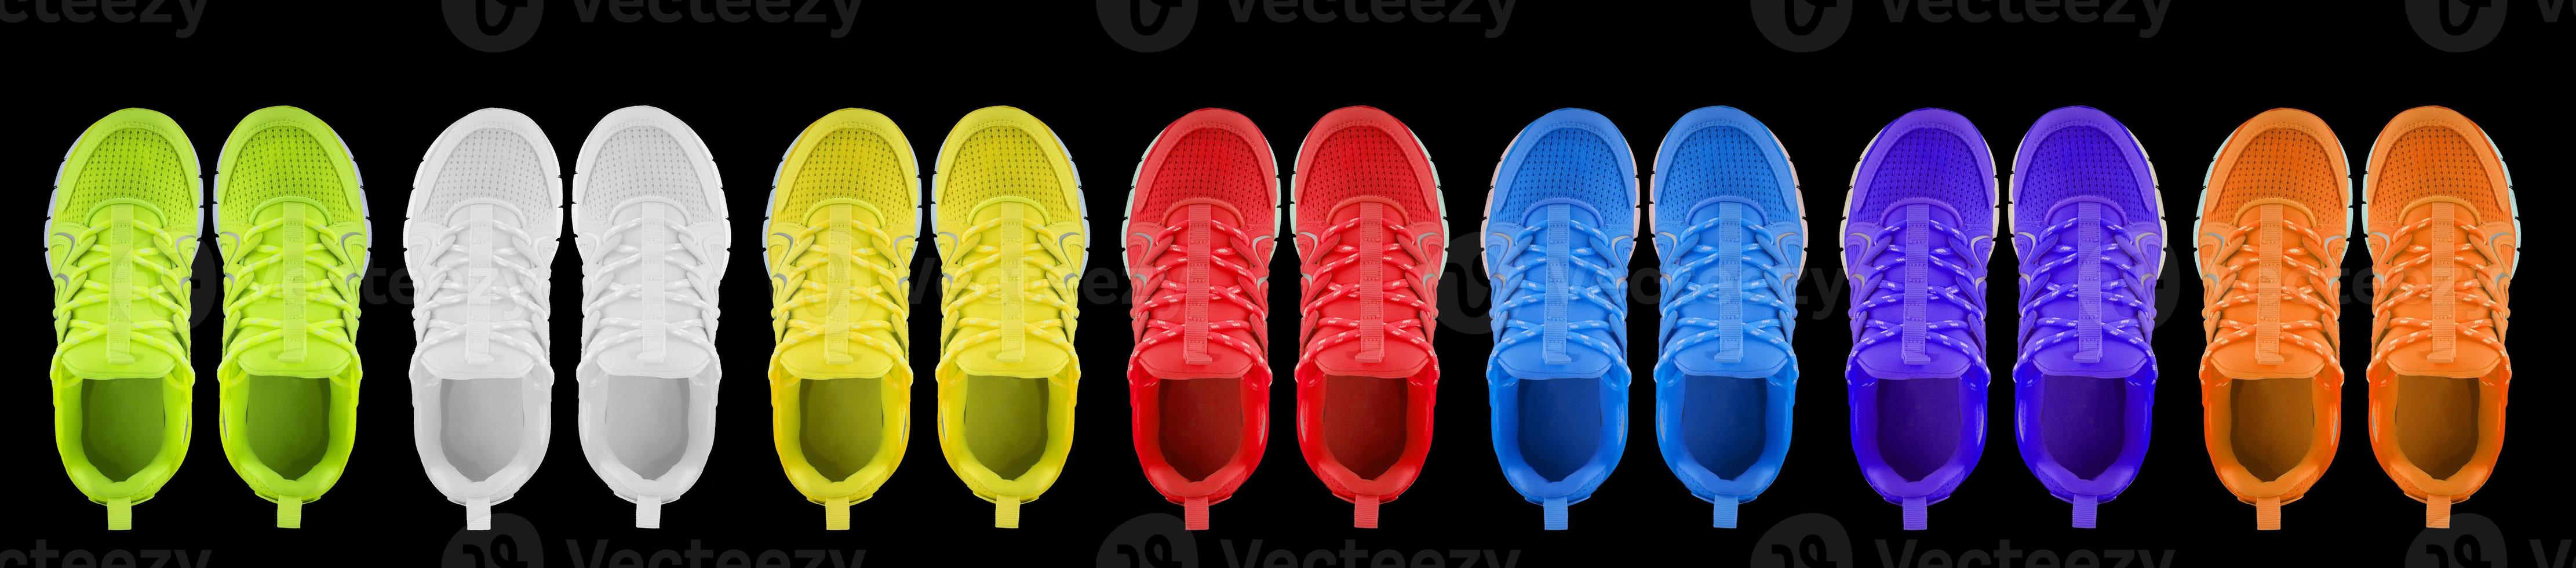 Sneakers in different colors on a black background. Seamless texture of multi-colored shoes. photo